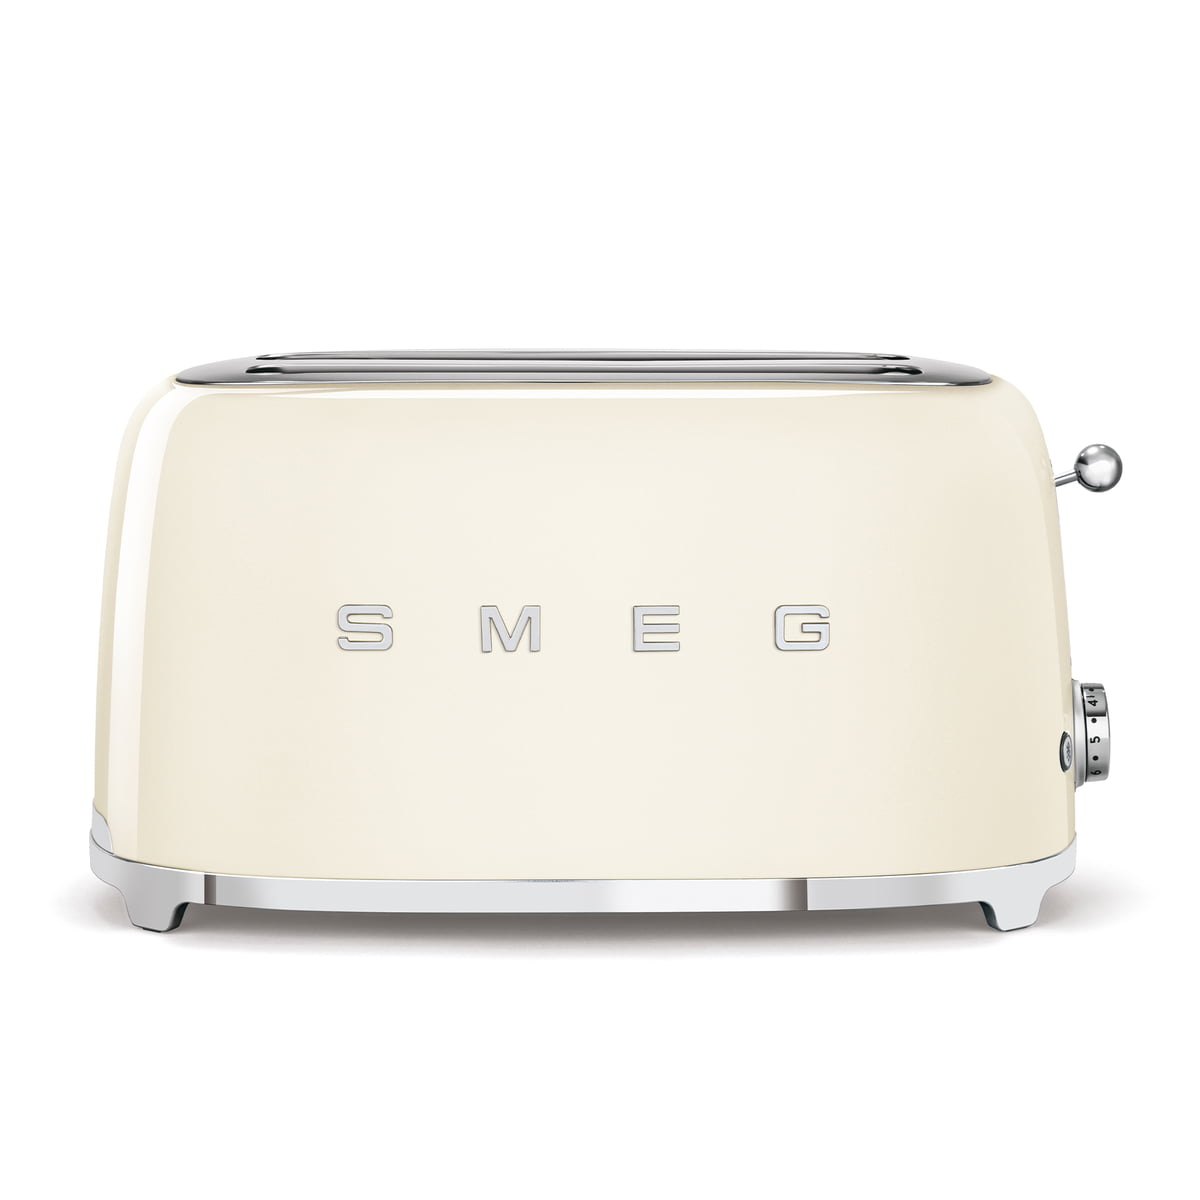 Long Slot Toaster, with Warming Rack, 1.7'' Extra Wide Slots Stainless  Steel Toasters, 6 Bread Shade Settings